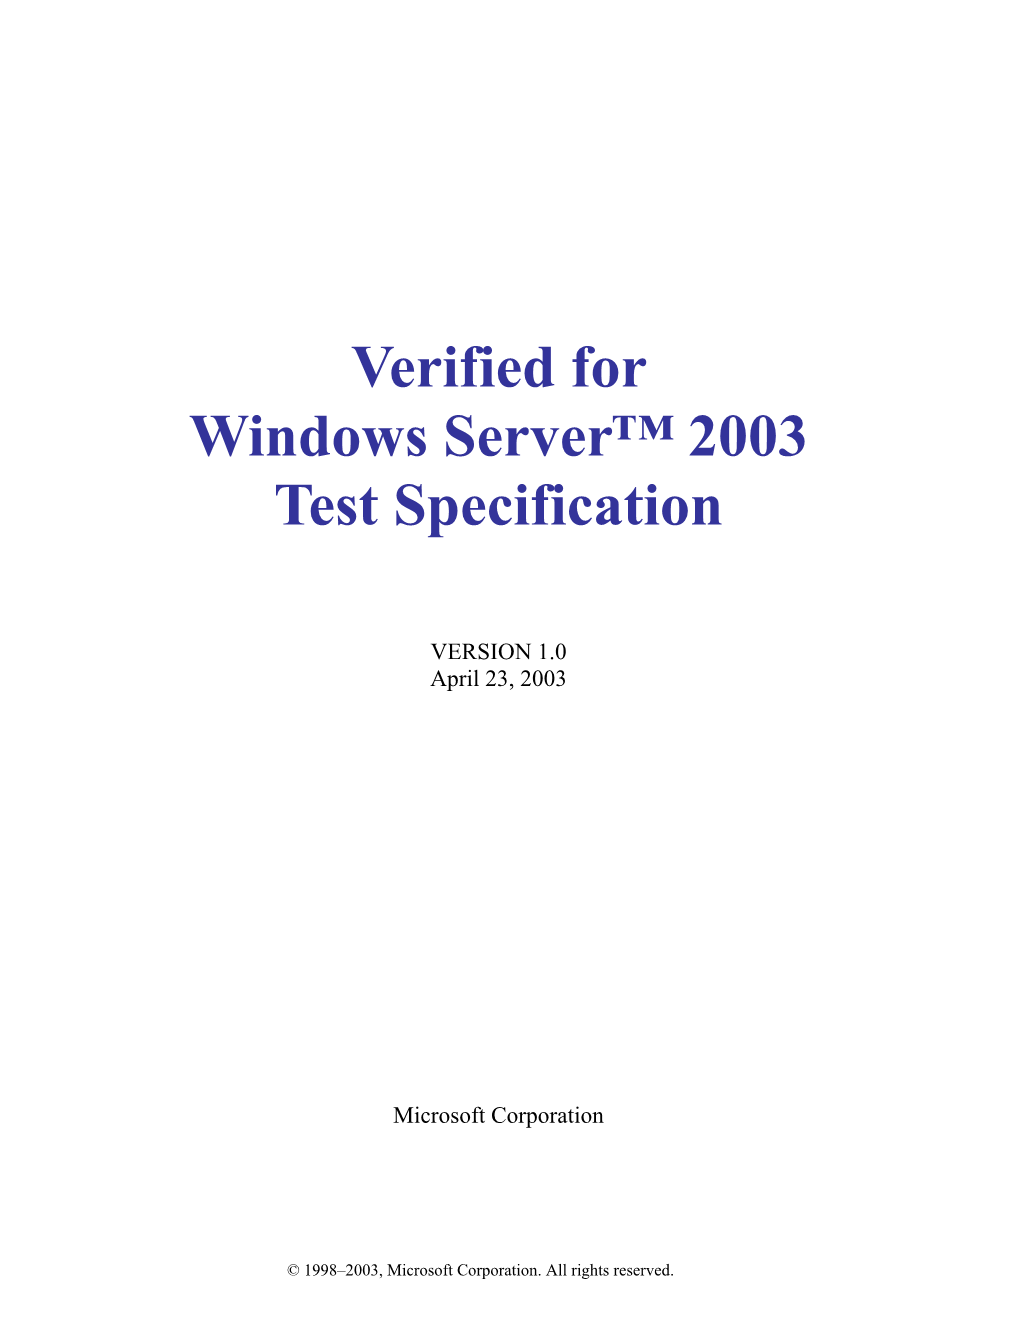 Verified for Windows Server™ 2003 Test Specification